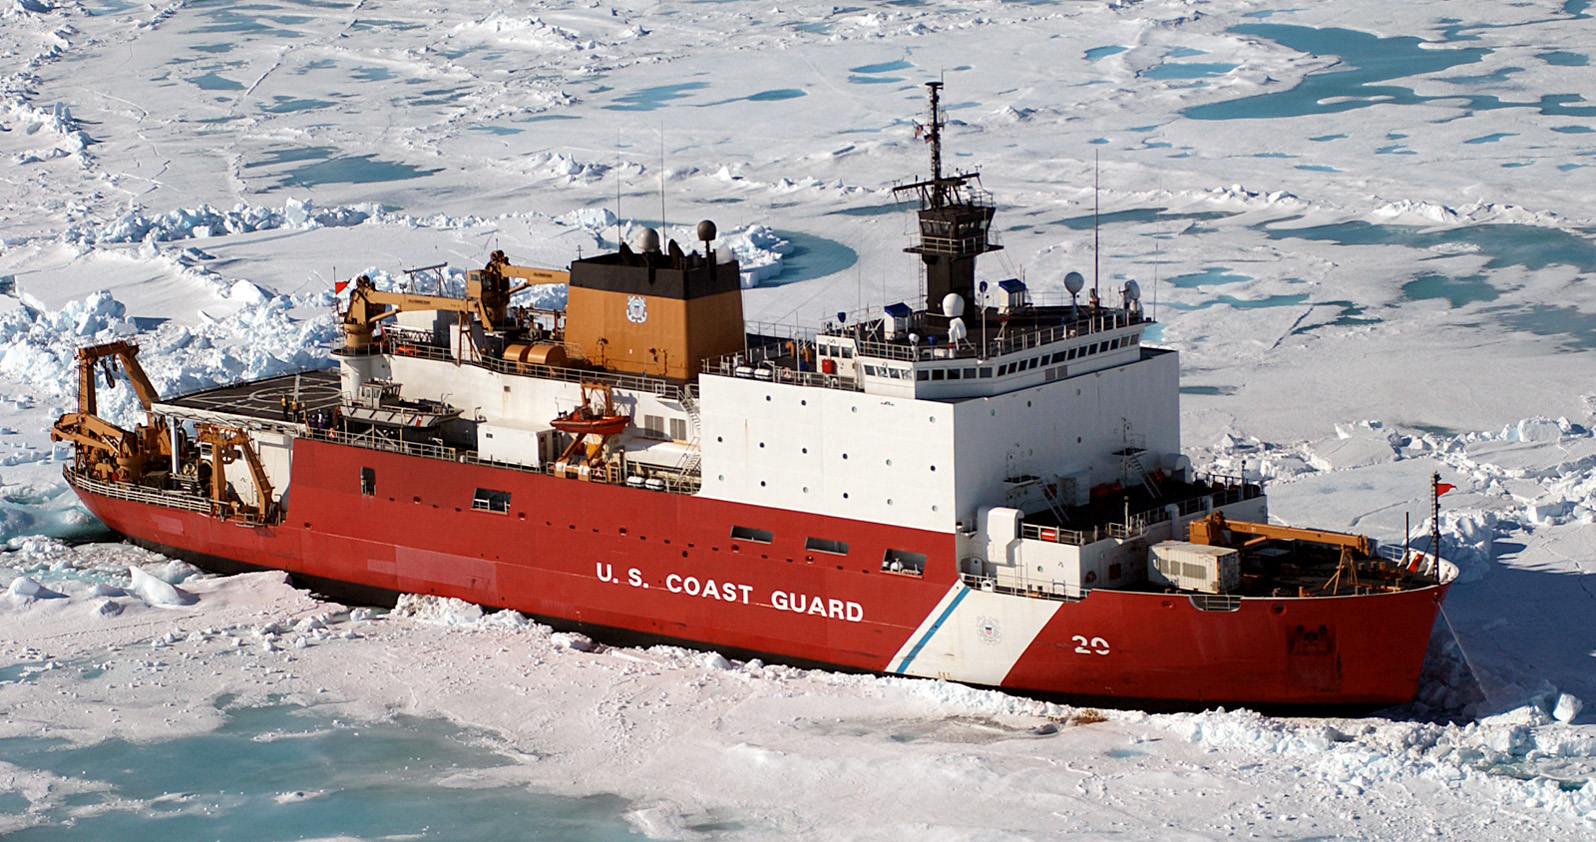 With an eye towards protecting the Arctic, Congress gives nearly $1 billion more in funding to the Coast Guard